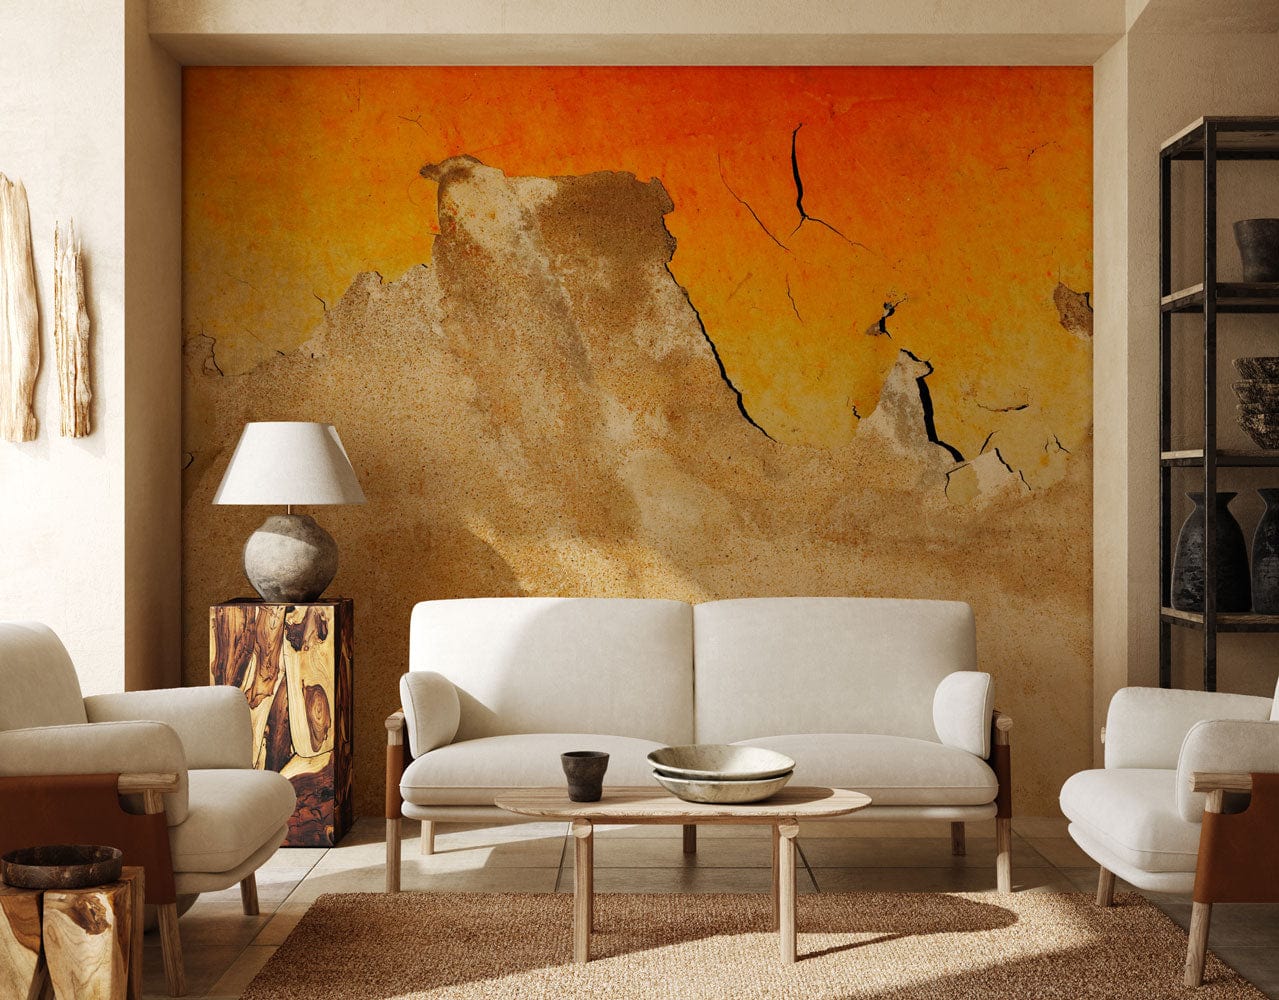 Fallen Orange Wall Skin Wallpaper Mural for Use in Decorating the Living Room